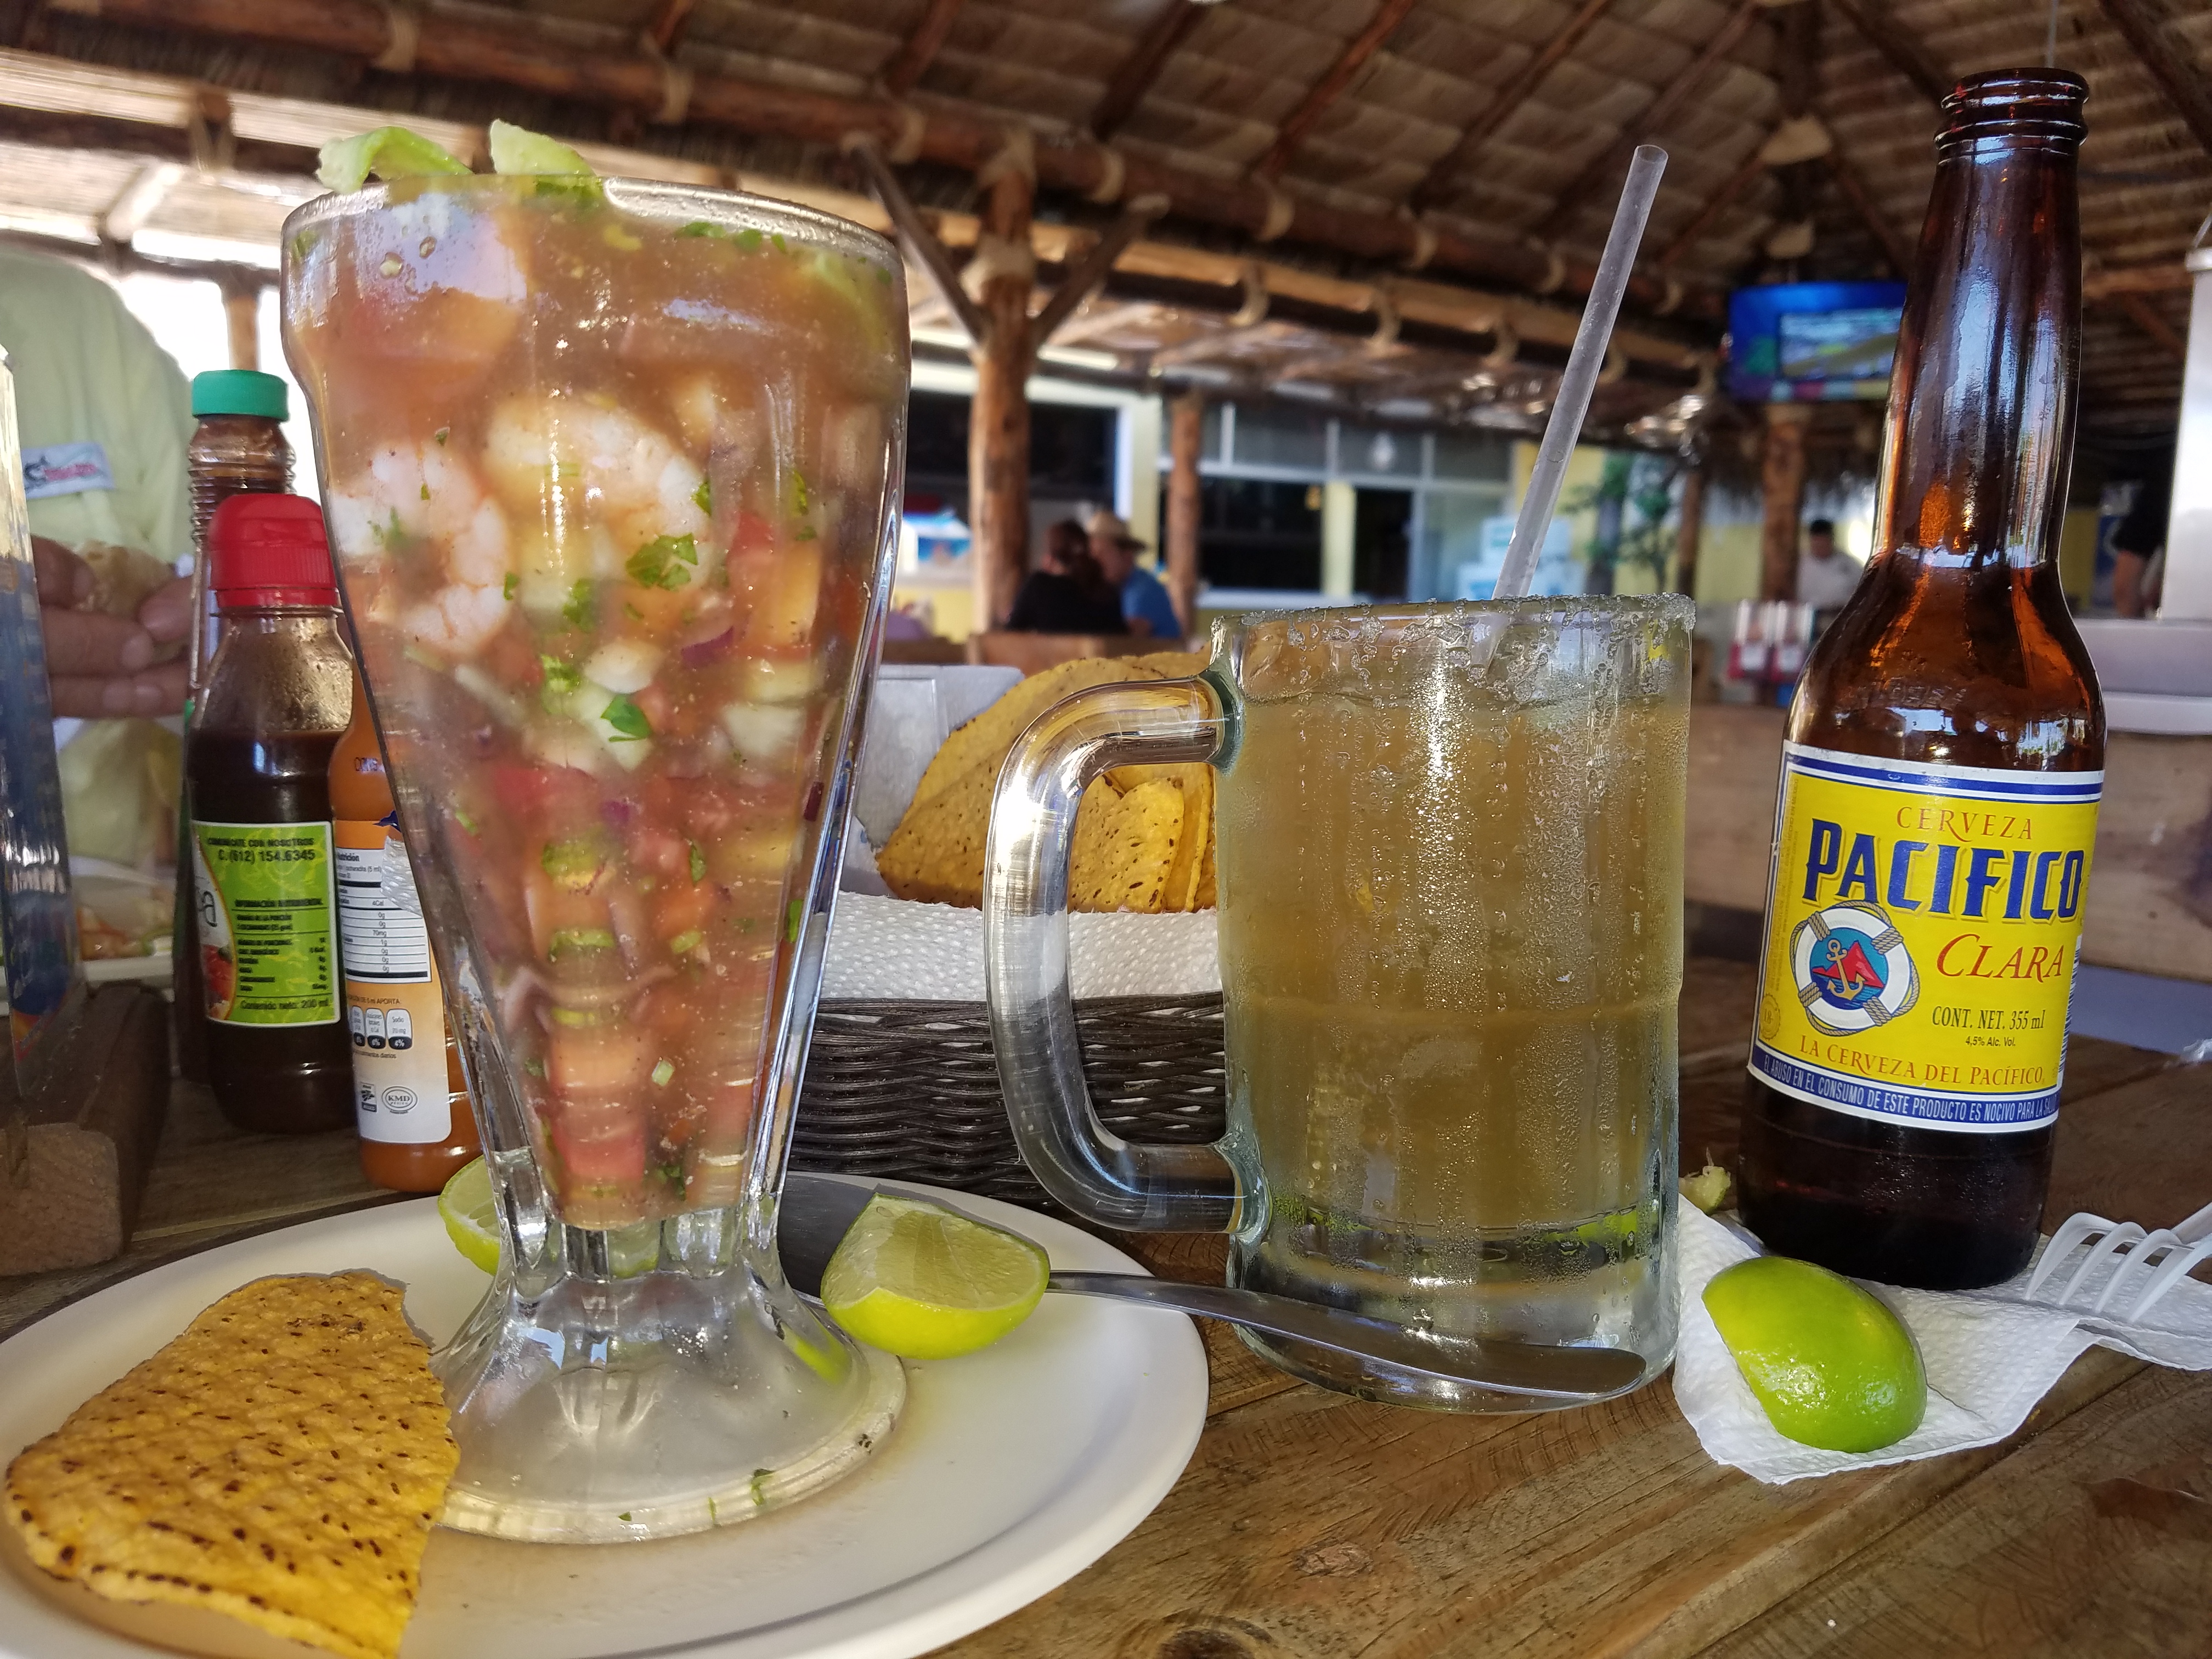 seafood coctel and a michelada. YUM!!